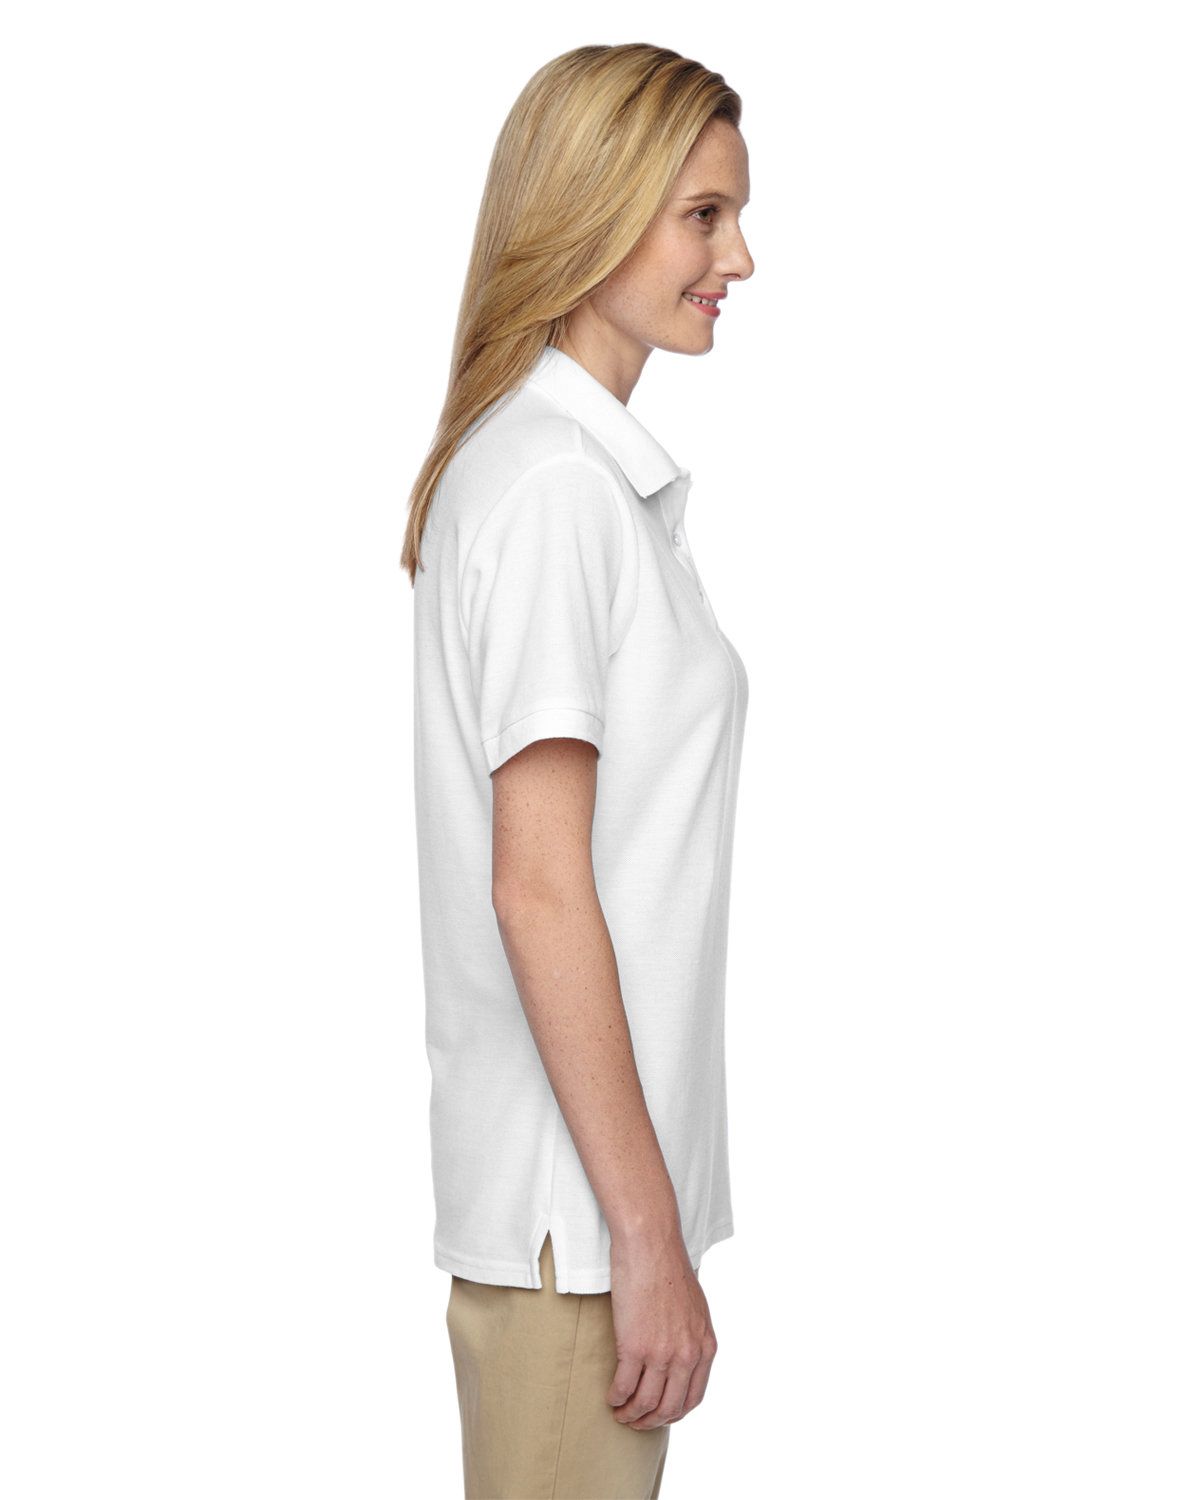 'Jerzees 537WR Ladies Easy Cotton Polyester Care Polo-shirts'